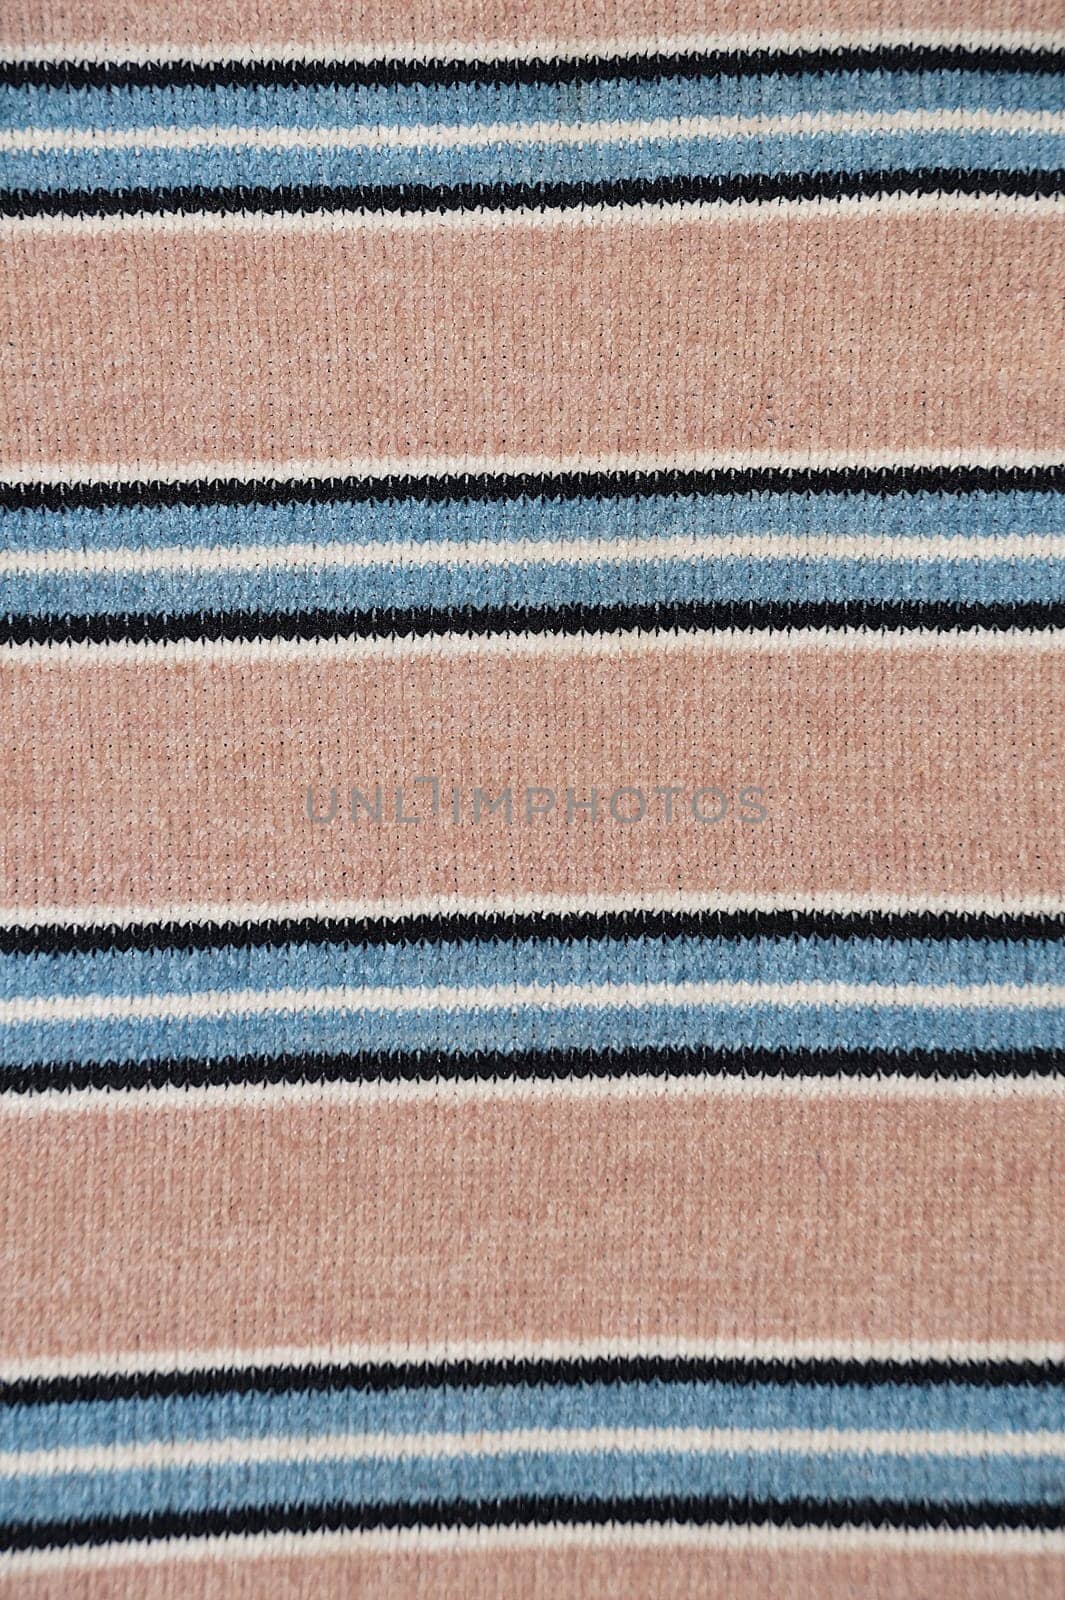 Knitted material closeup with striped pattern in beige, blue and black colors by Annado